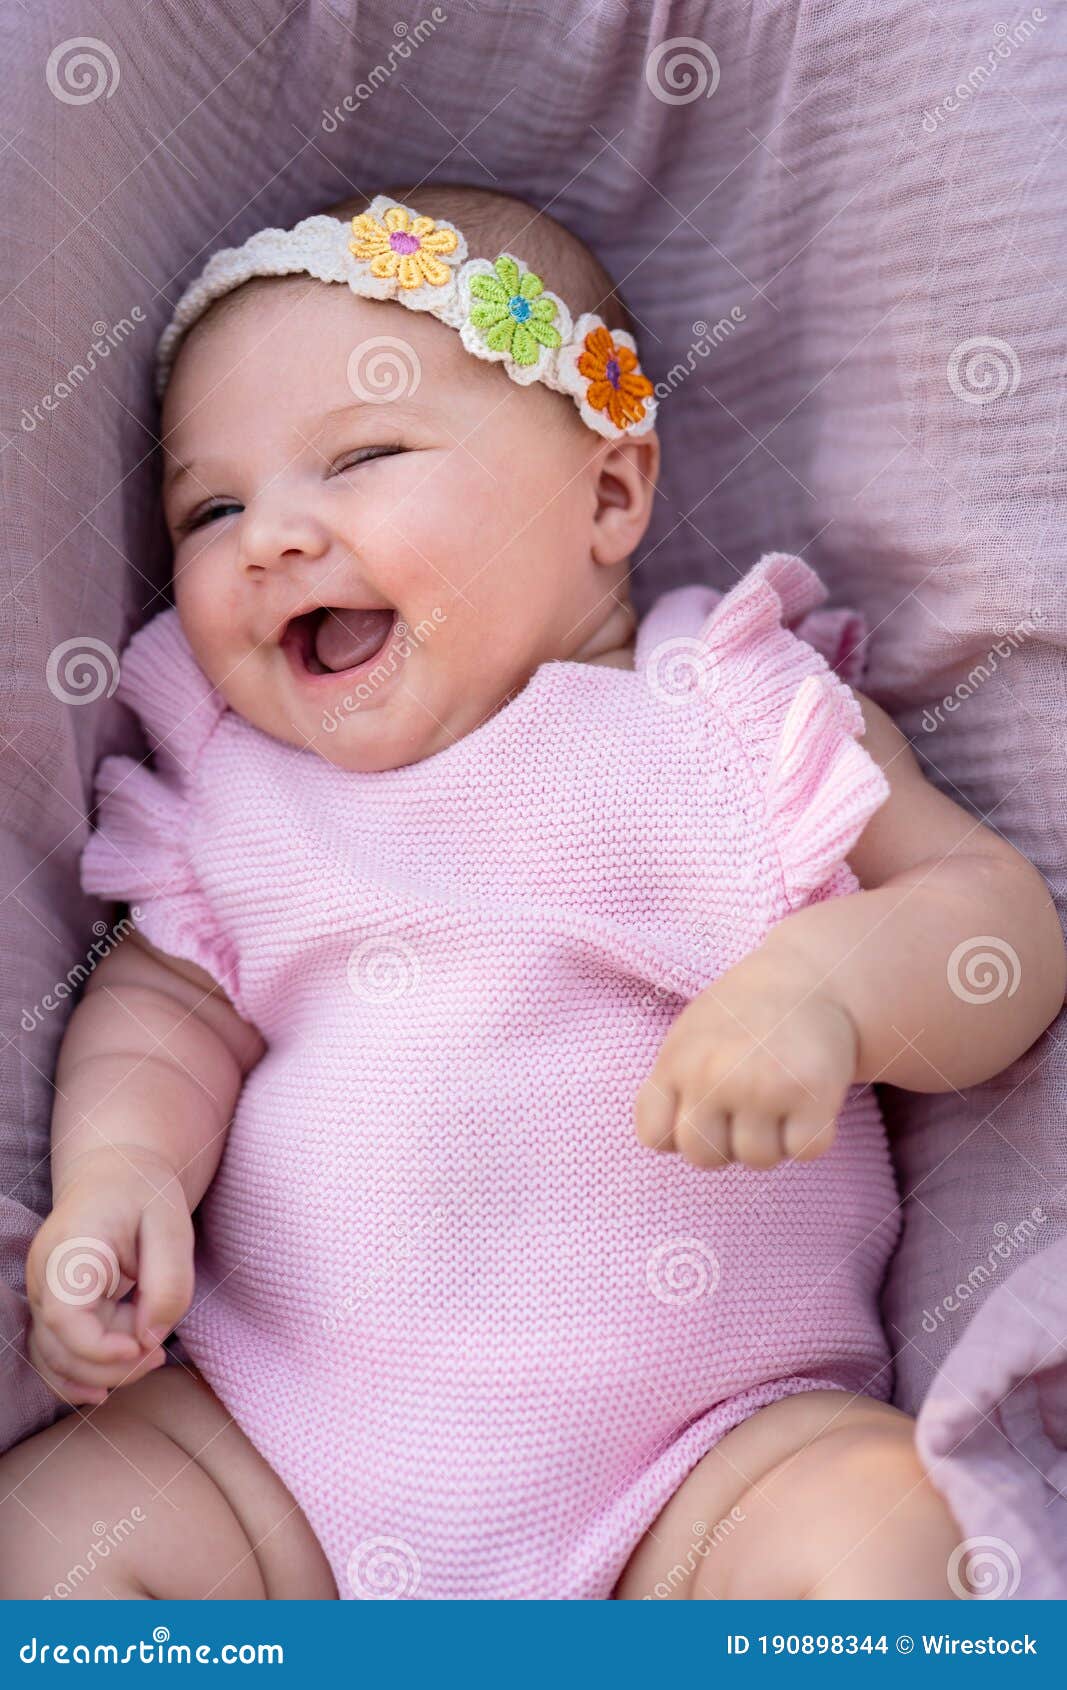 Smiling Newborn Baby Girl with Pink Clothes and Knitted Head ...